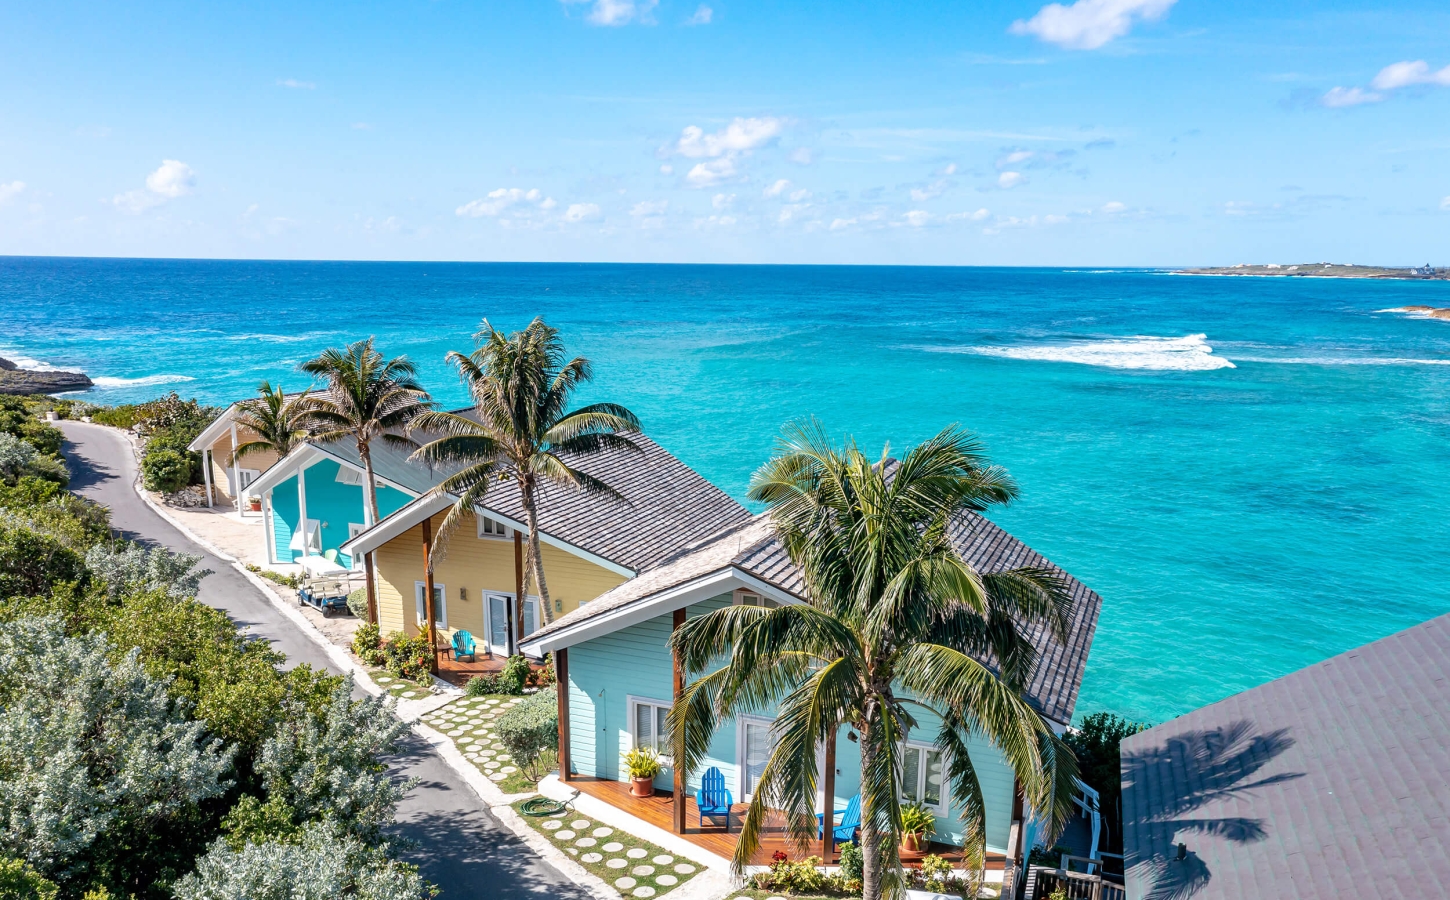 Houses for rent at The Abaco Club overlooking the Bahamian sea